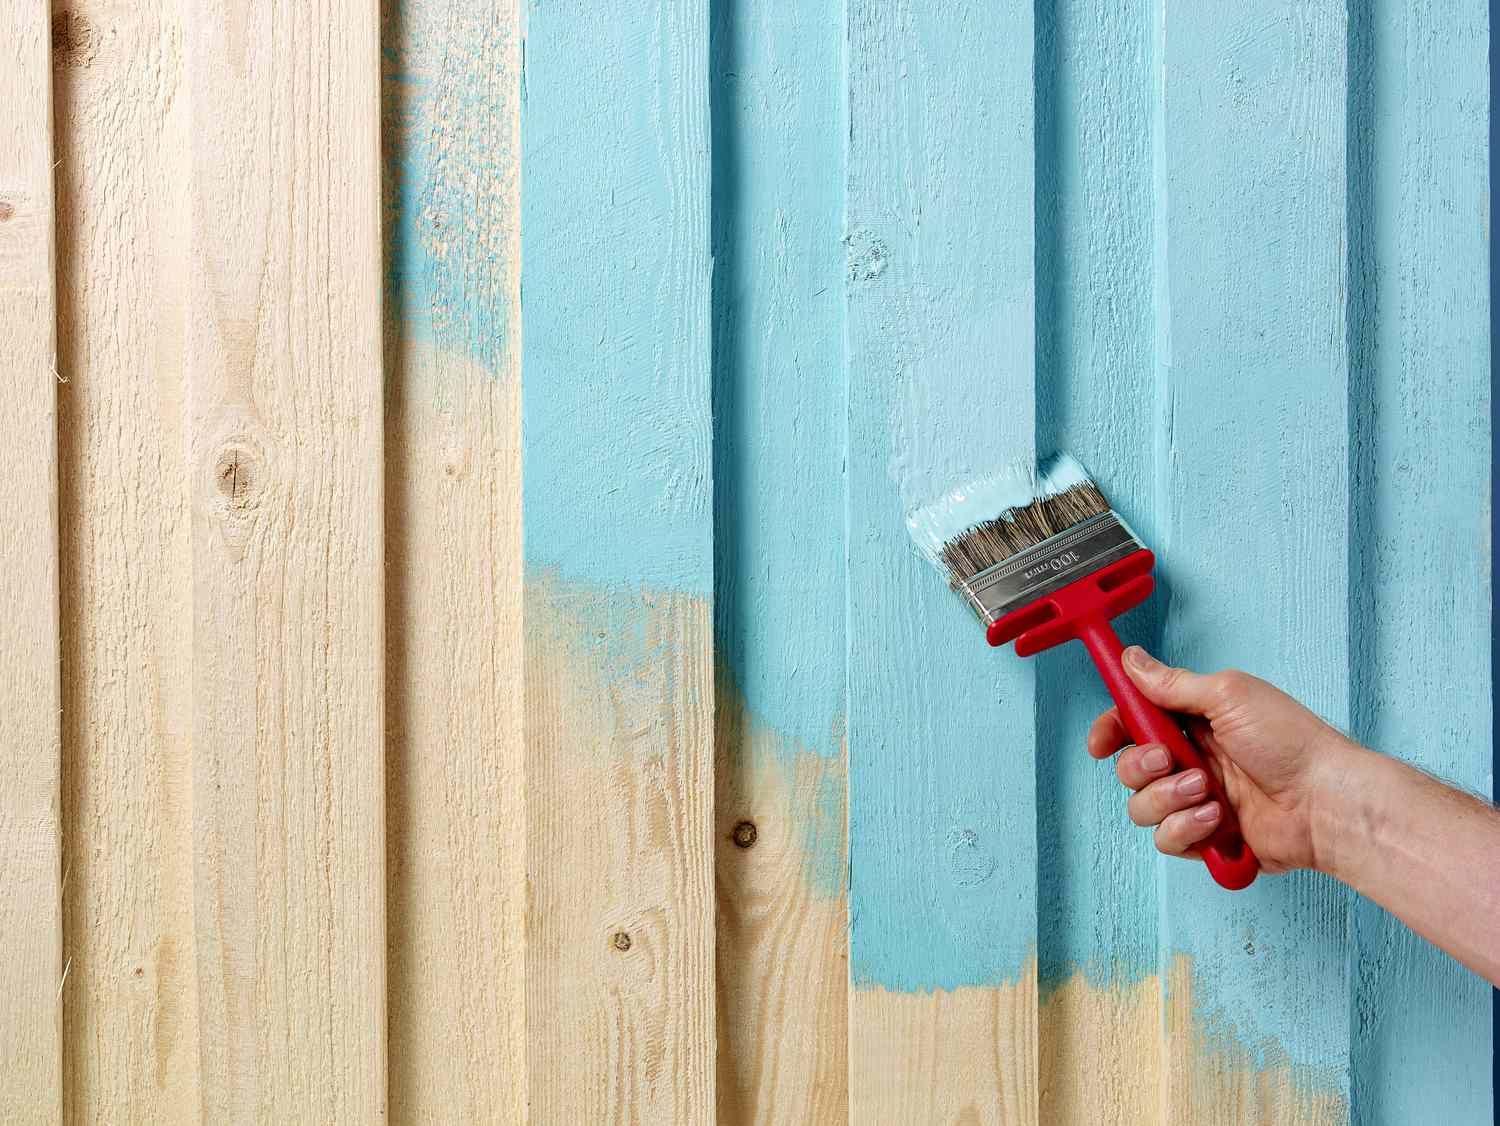 An image of a wooden fence being painted blue, with smooth strokes and vibrant color transforming its appearance.